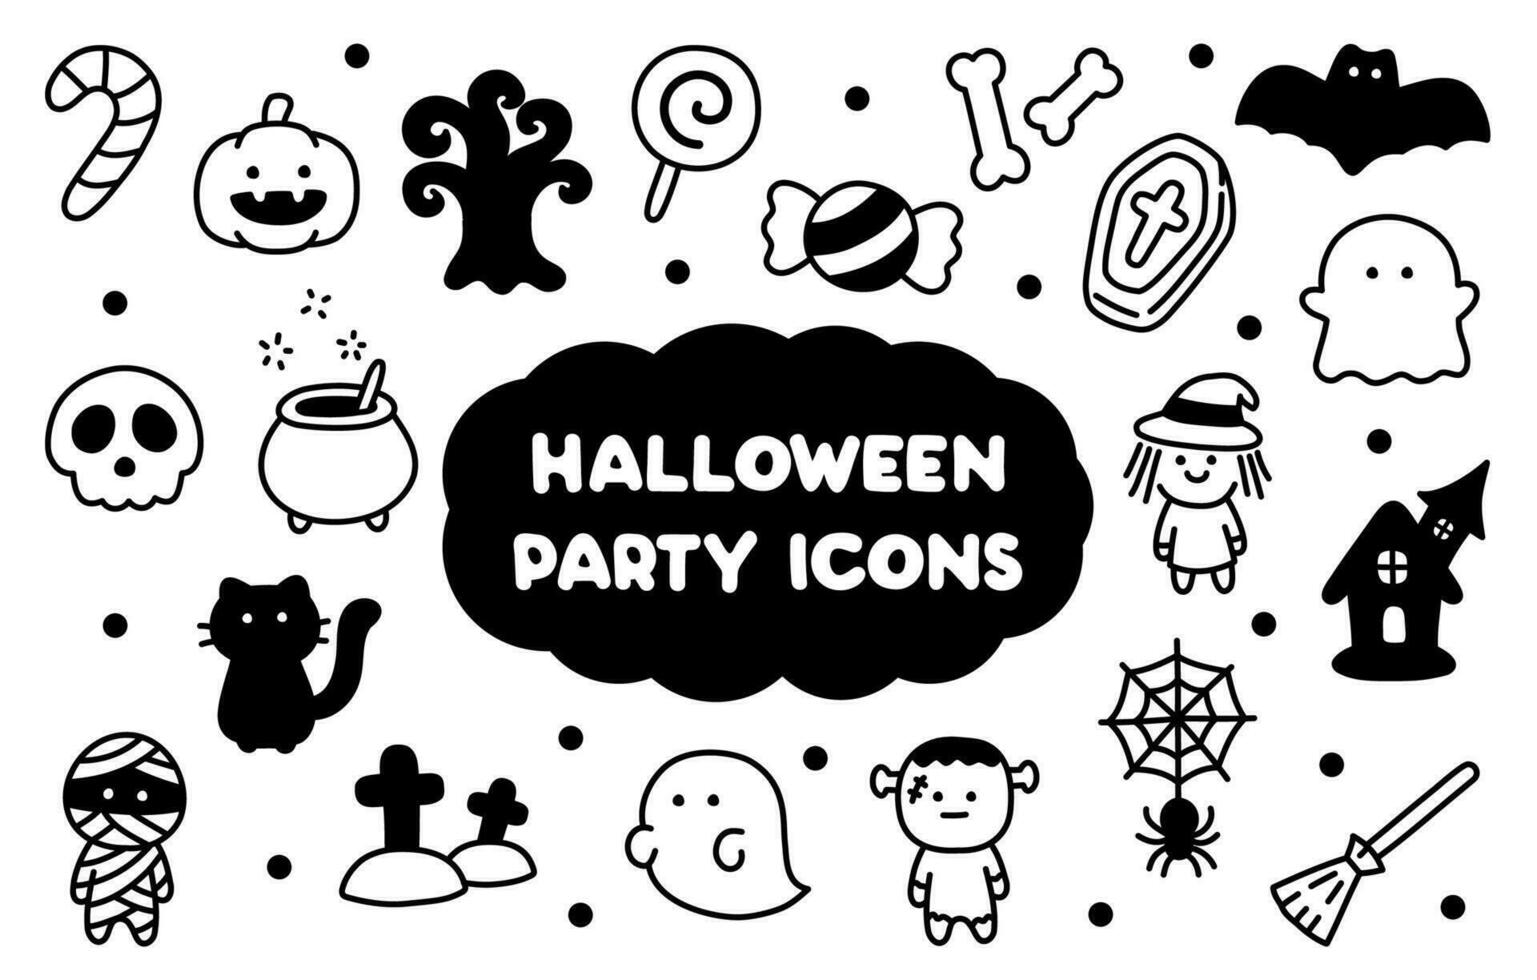 Doodle Hand-drawn Minimal Black and White Color, Cute Halloween Party Icons for Kids. vector